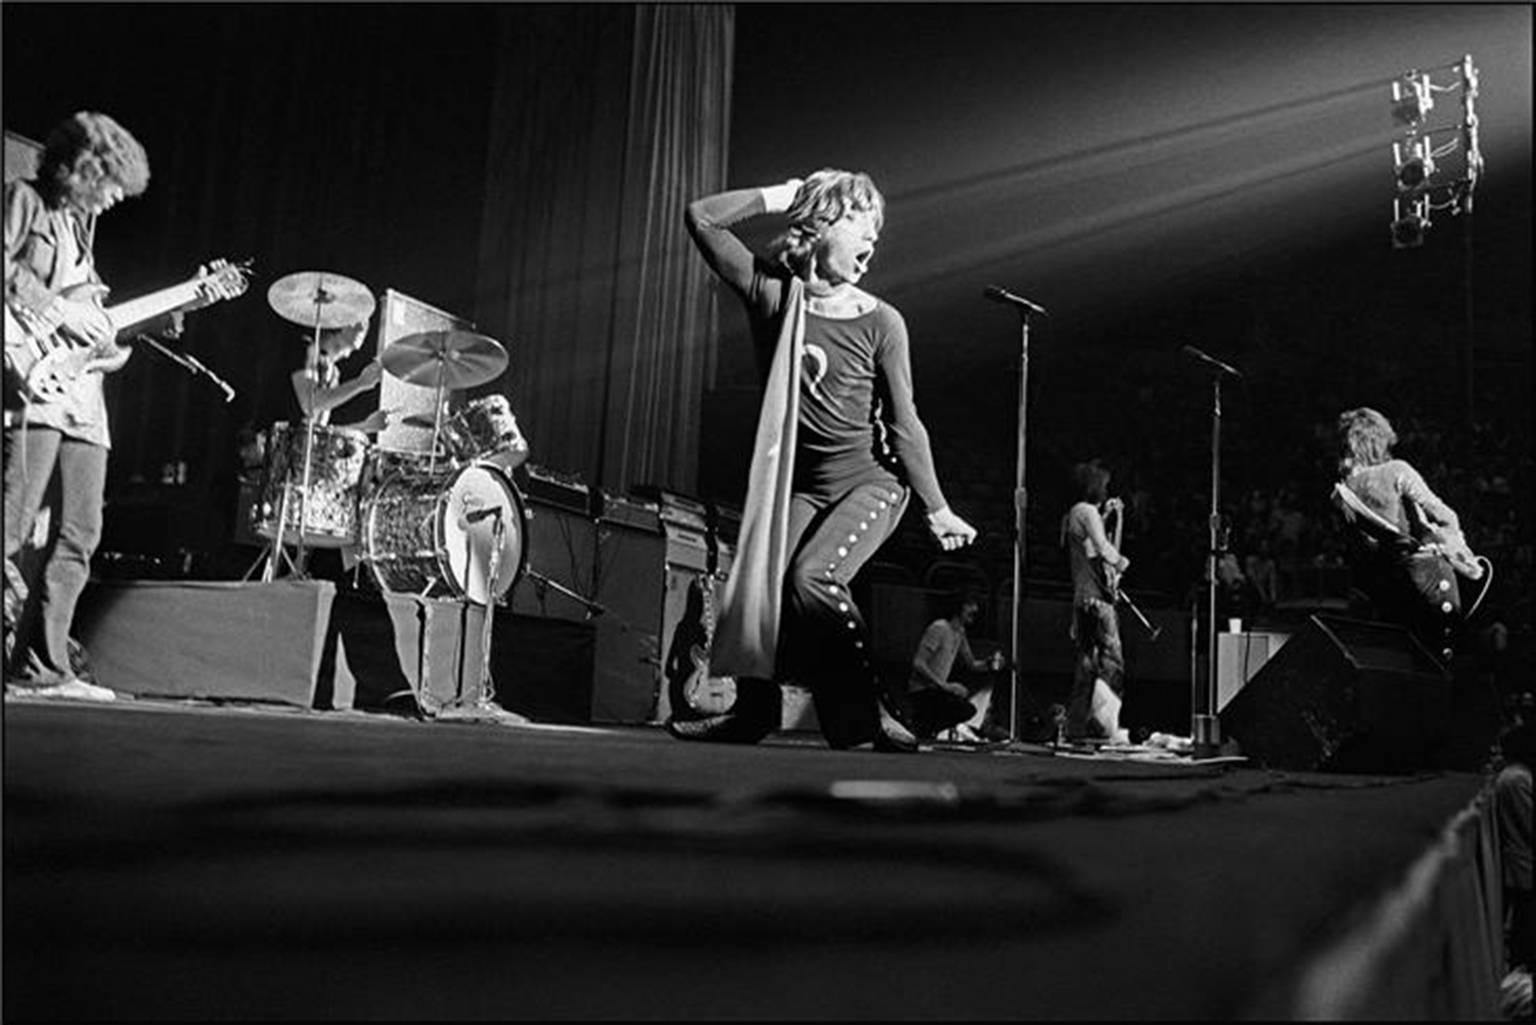 Ethan Russell Black and White Photograph - The Rolling Stones, 1969